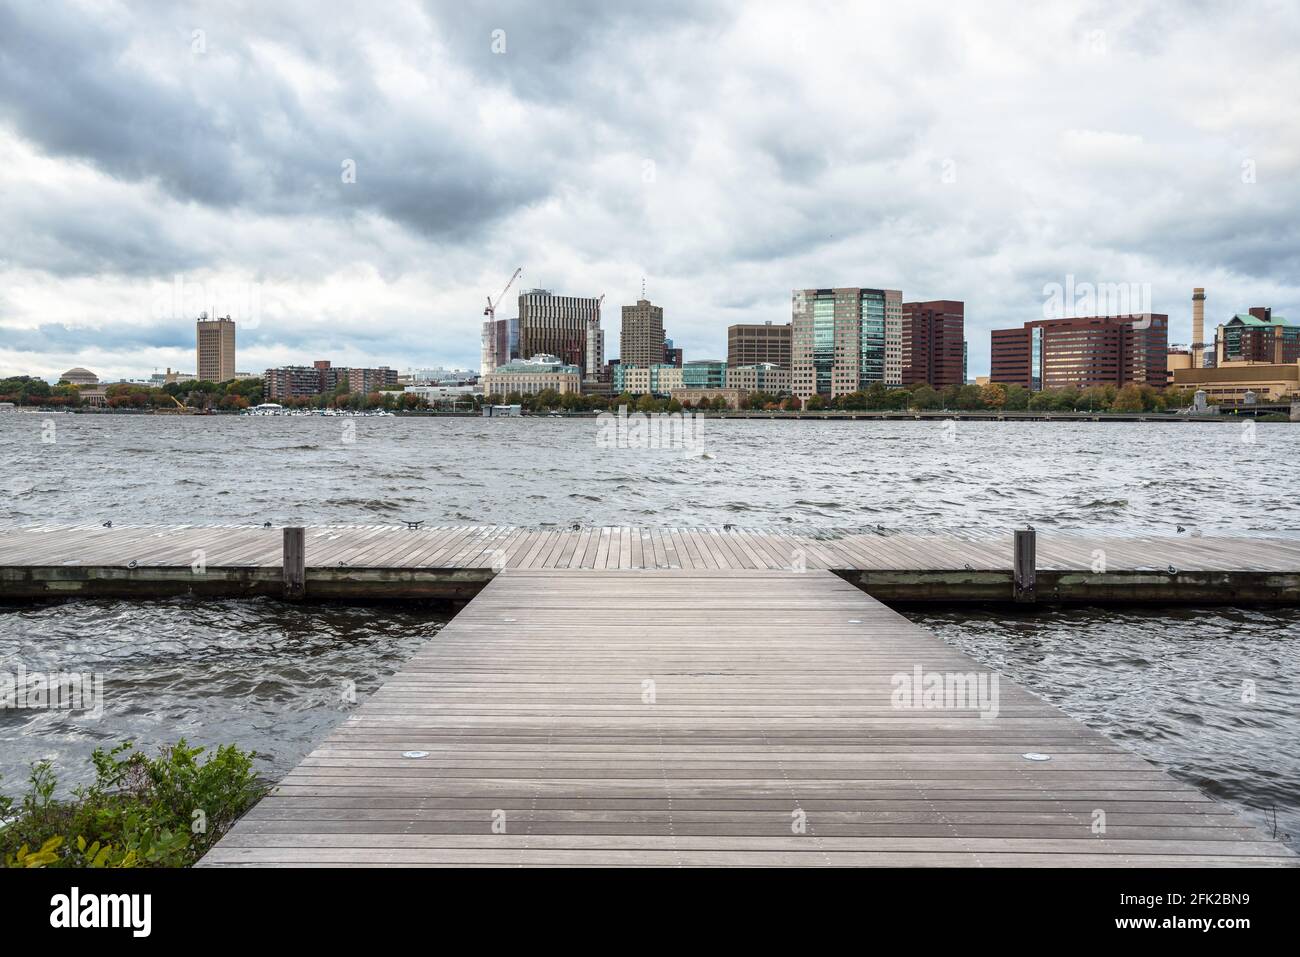 Deserted pier on a wide river with an urban skyline in background on a stormy autumn day Stock Photo